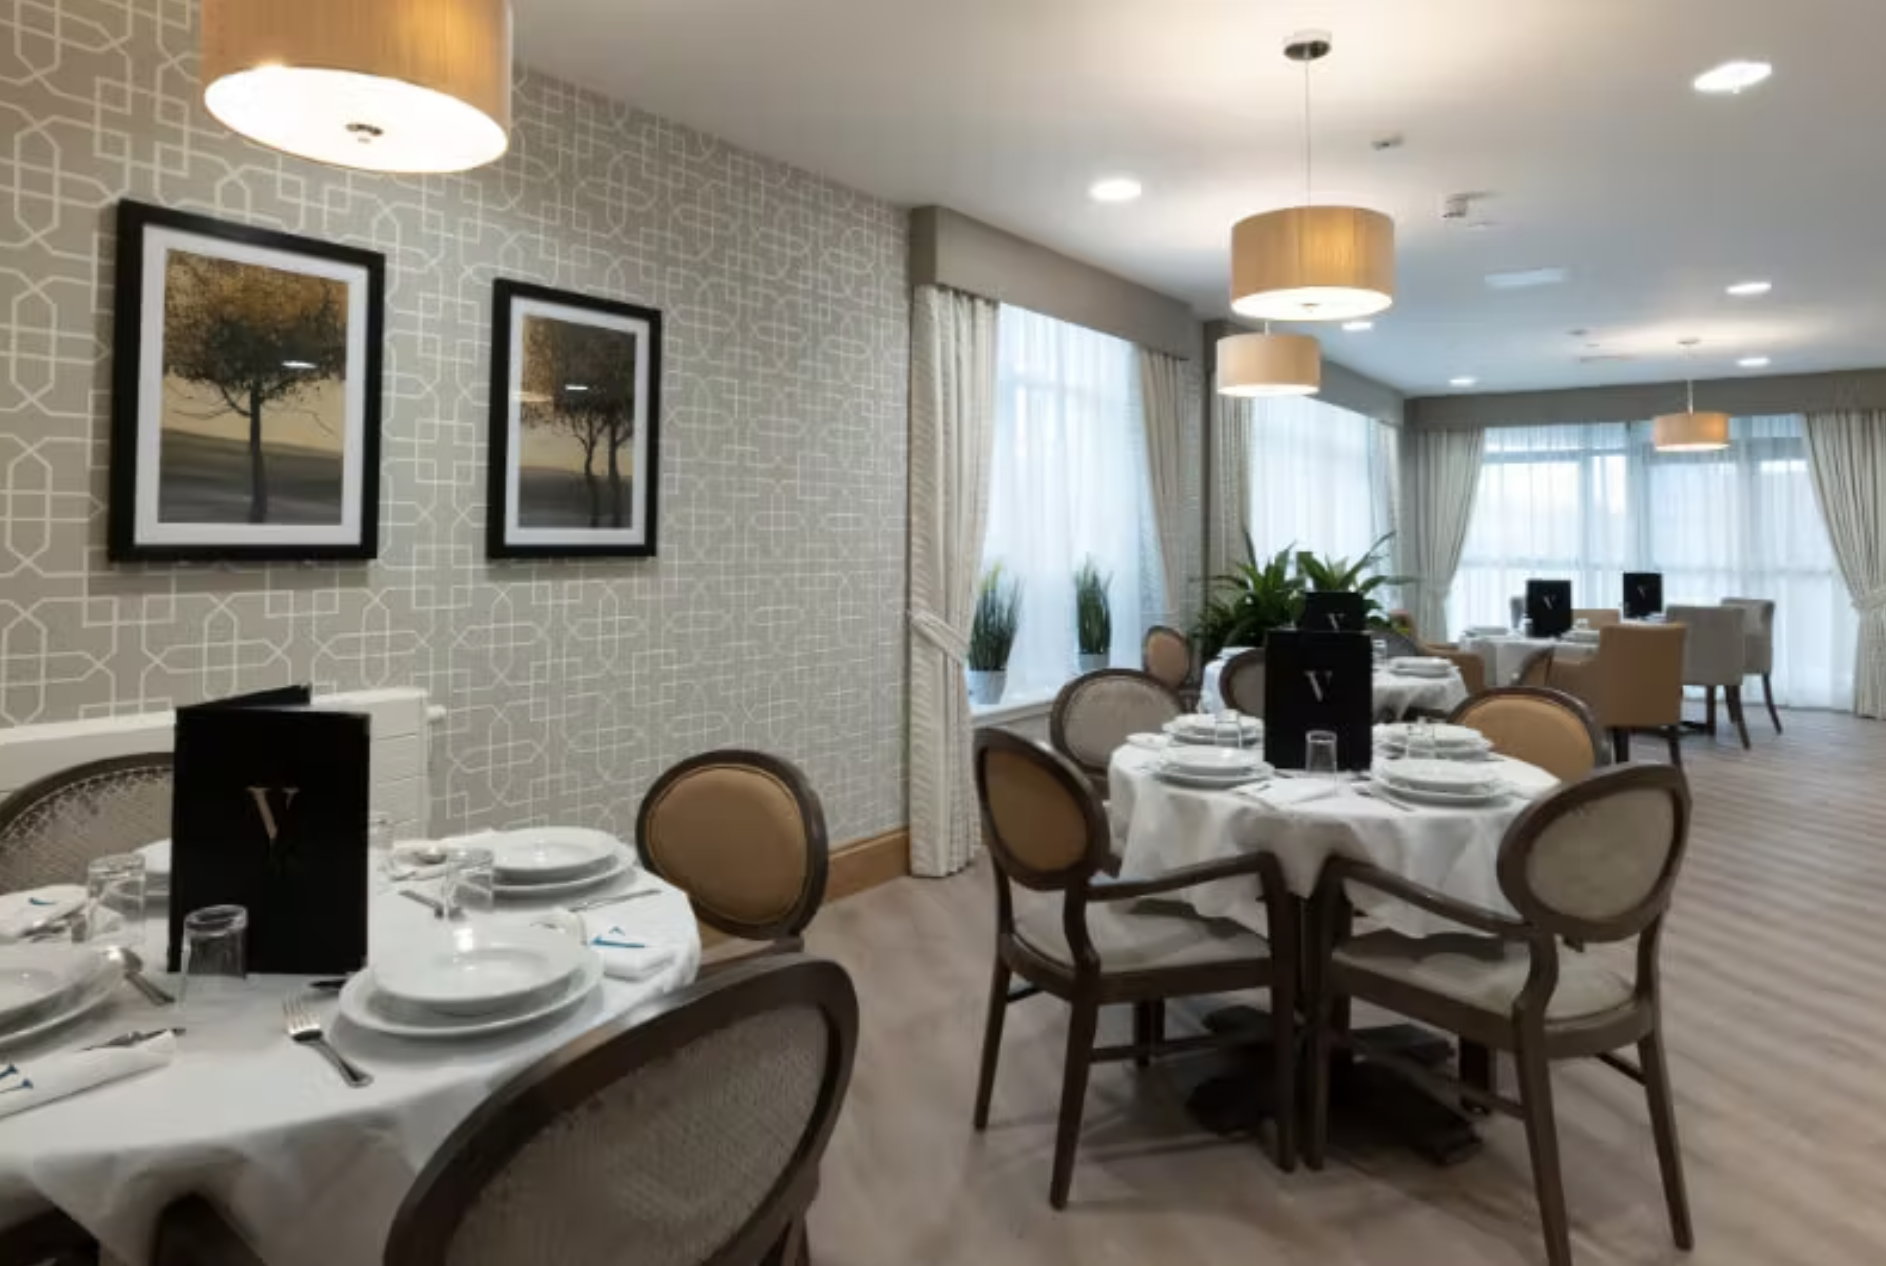 Independent Care Home - Valerian Court care home 9